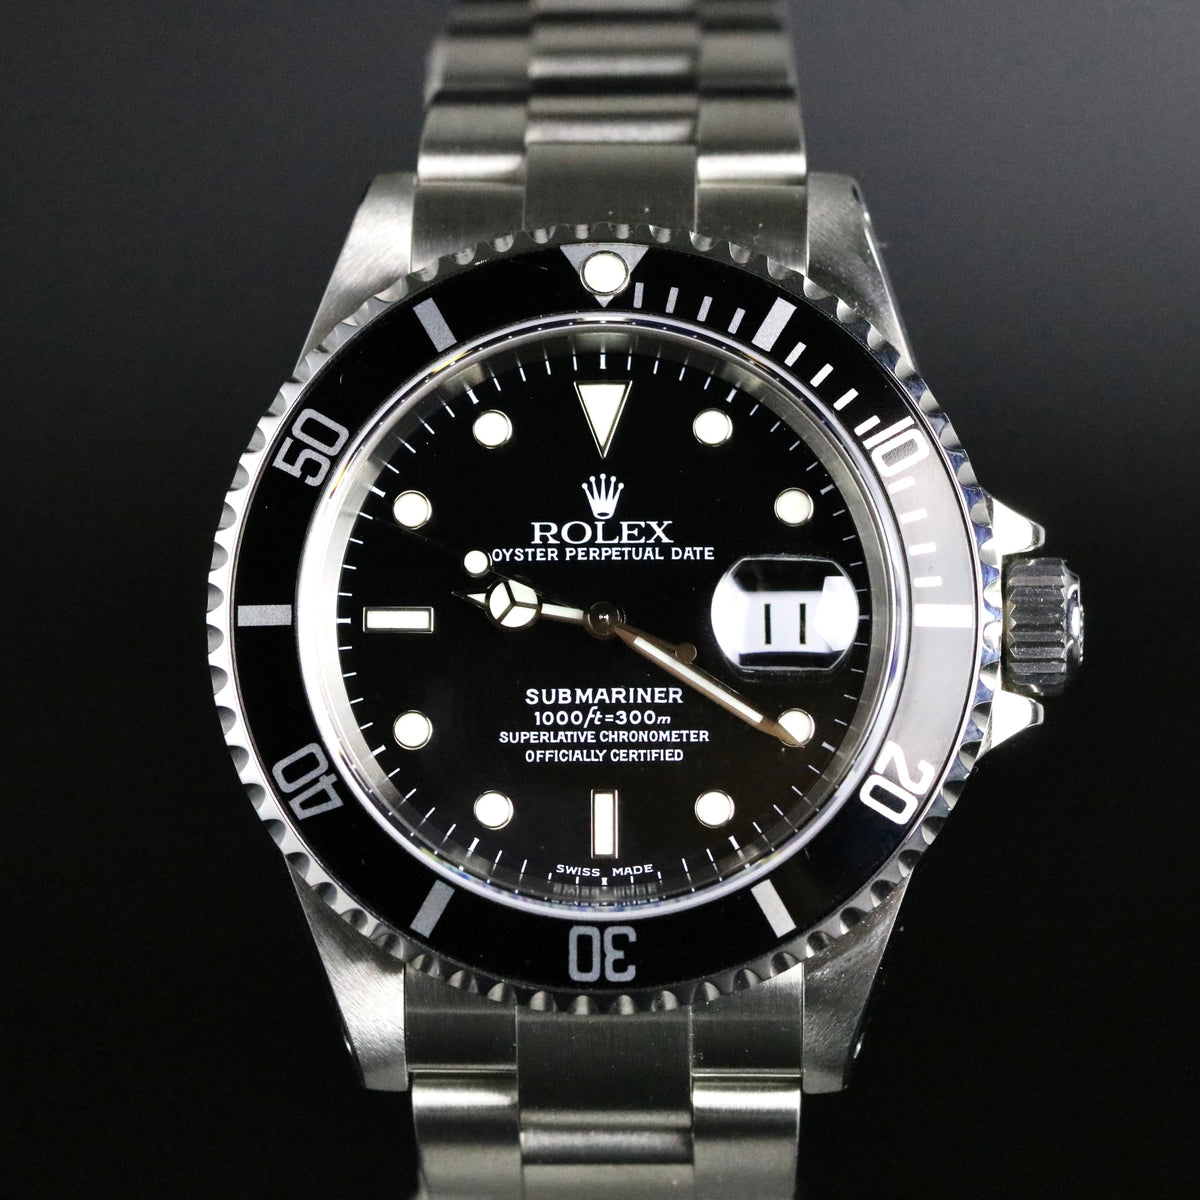 MINT Condition 2000 Rolex 16610 Submariner Box & Papers